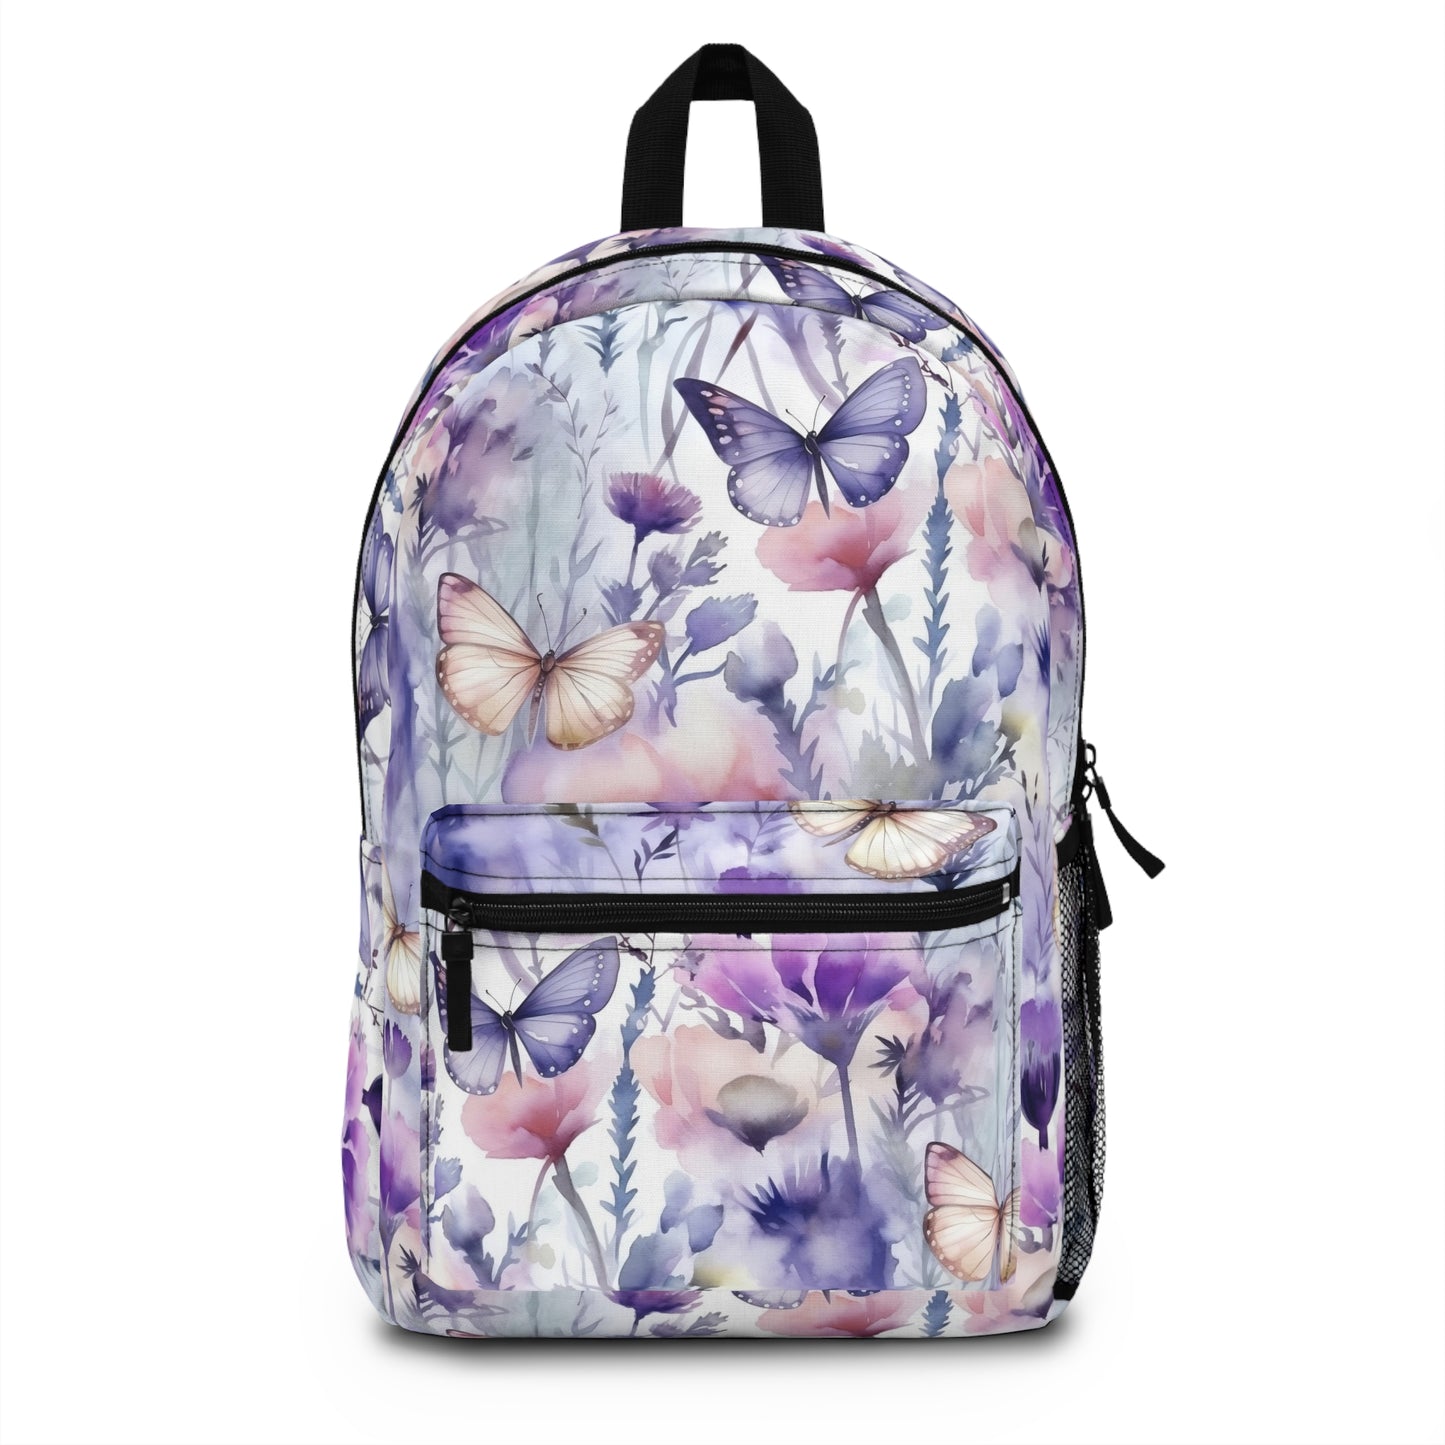 butterfly and flower backpack in blue, pink and yellow print